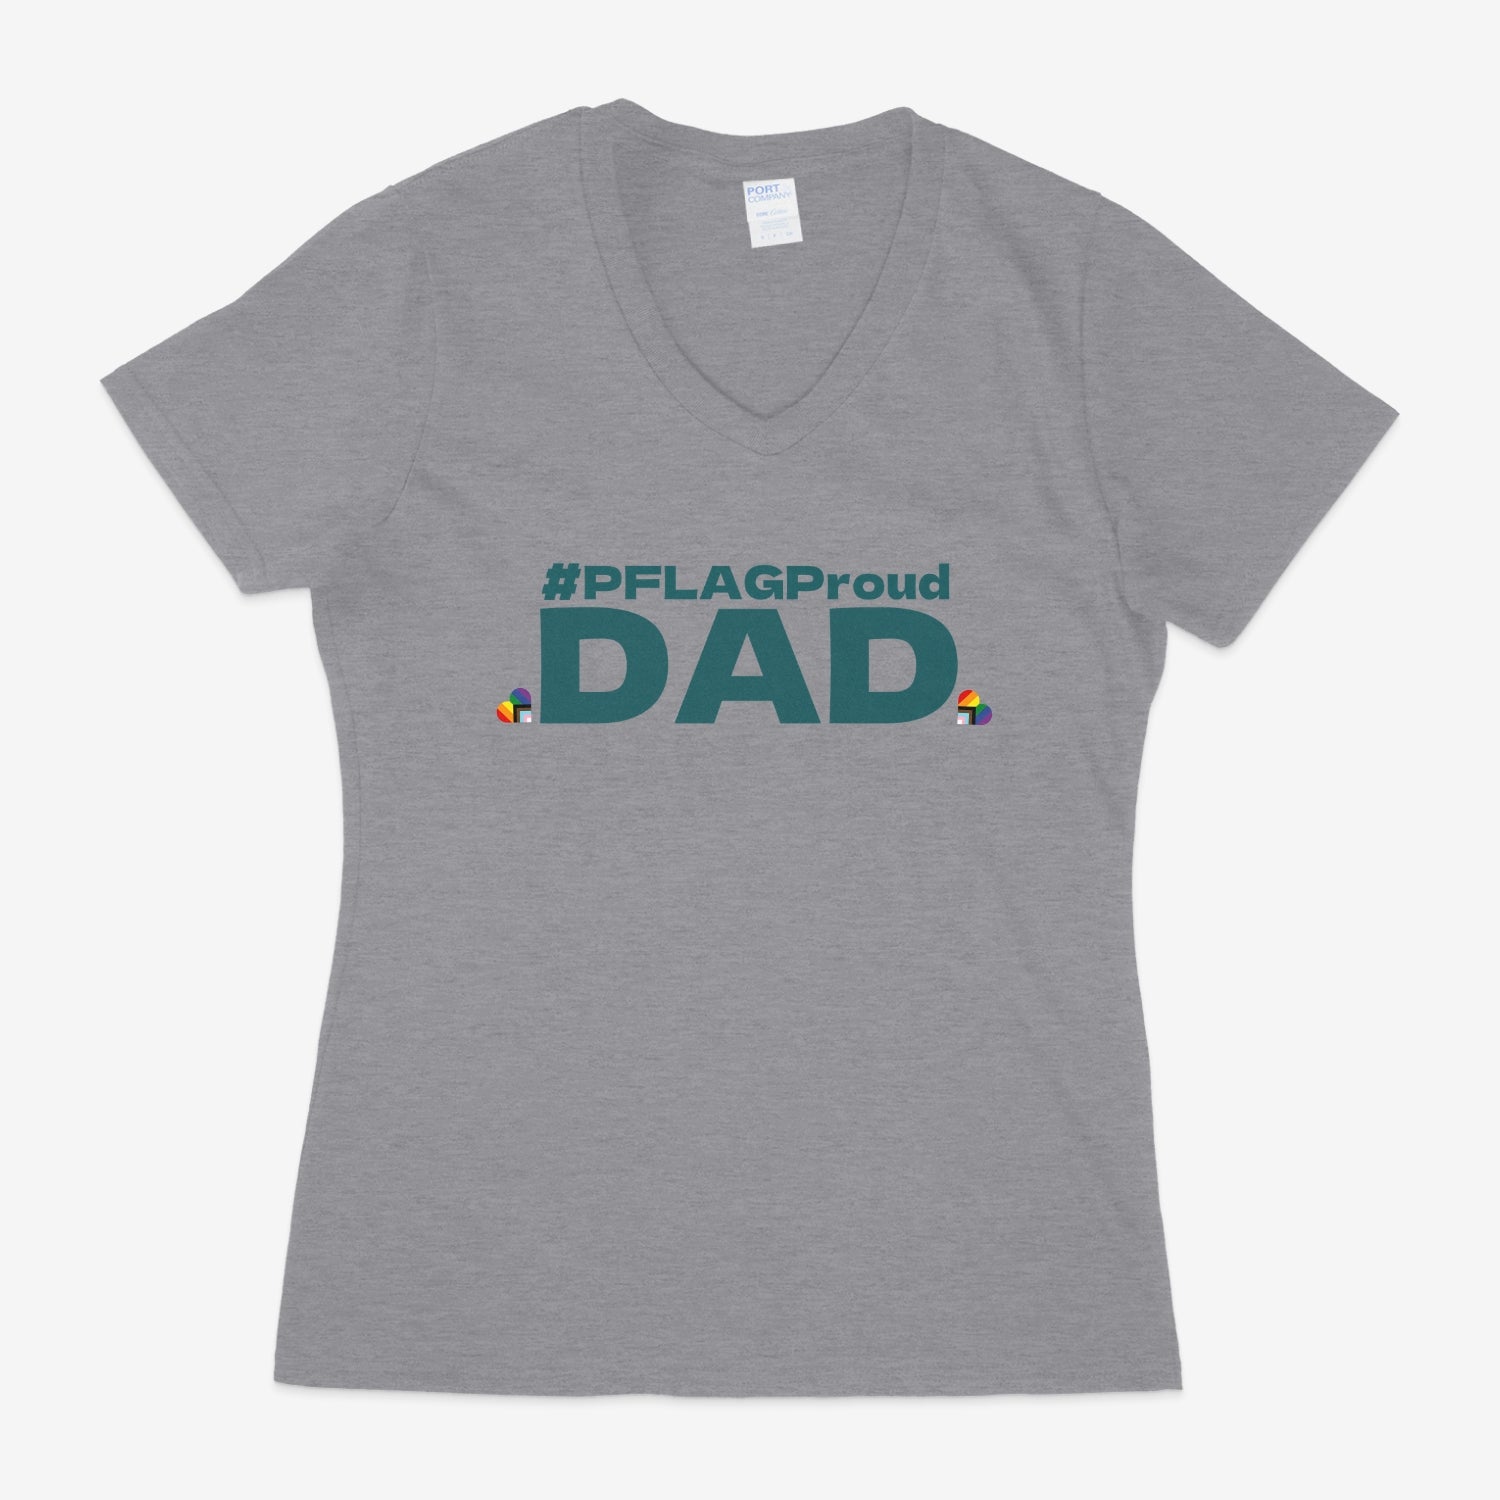 #PFLAGProud Dad - Fitted-Cut V-Neck Short Sleeve T-Shirt